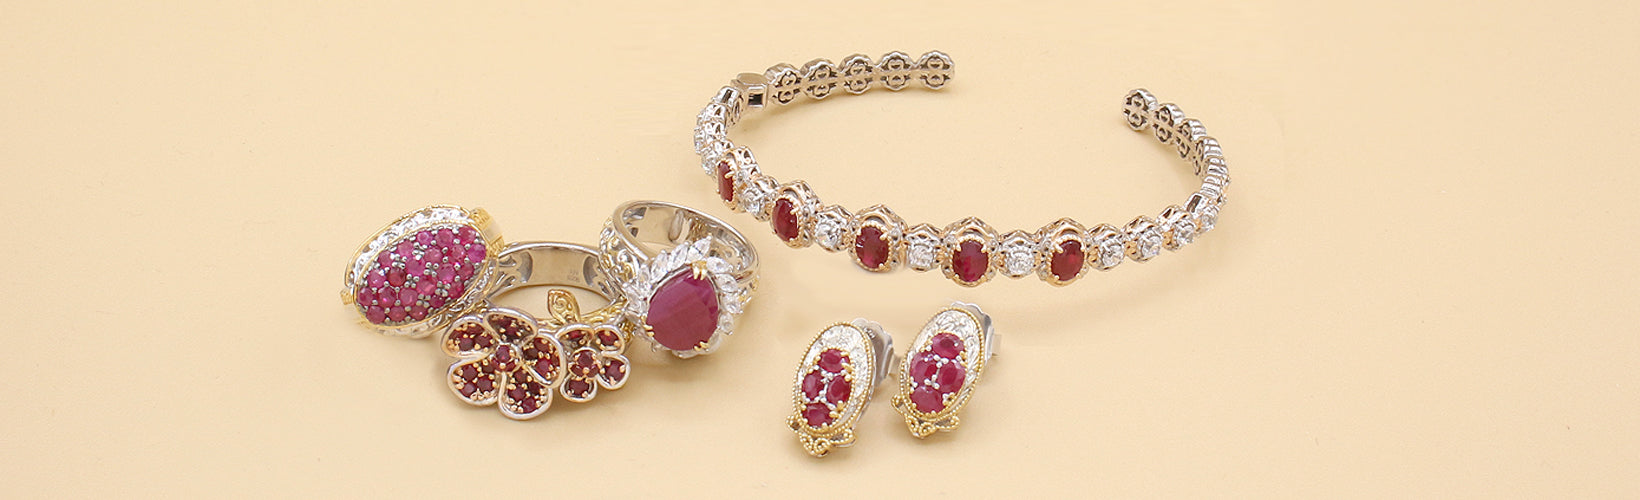 Gems En Vogue Ruby Jewelry Collection